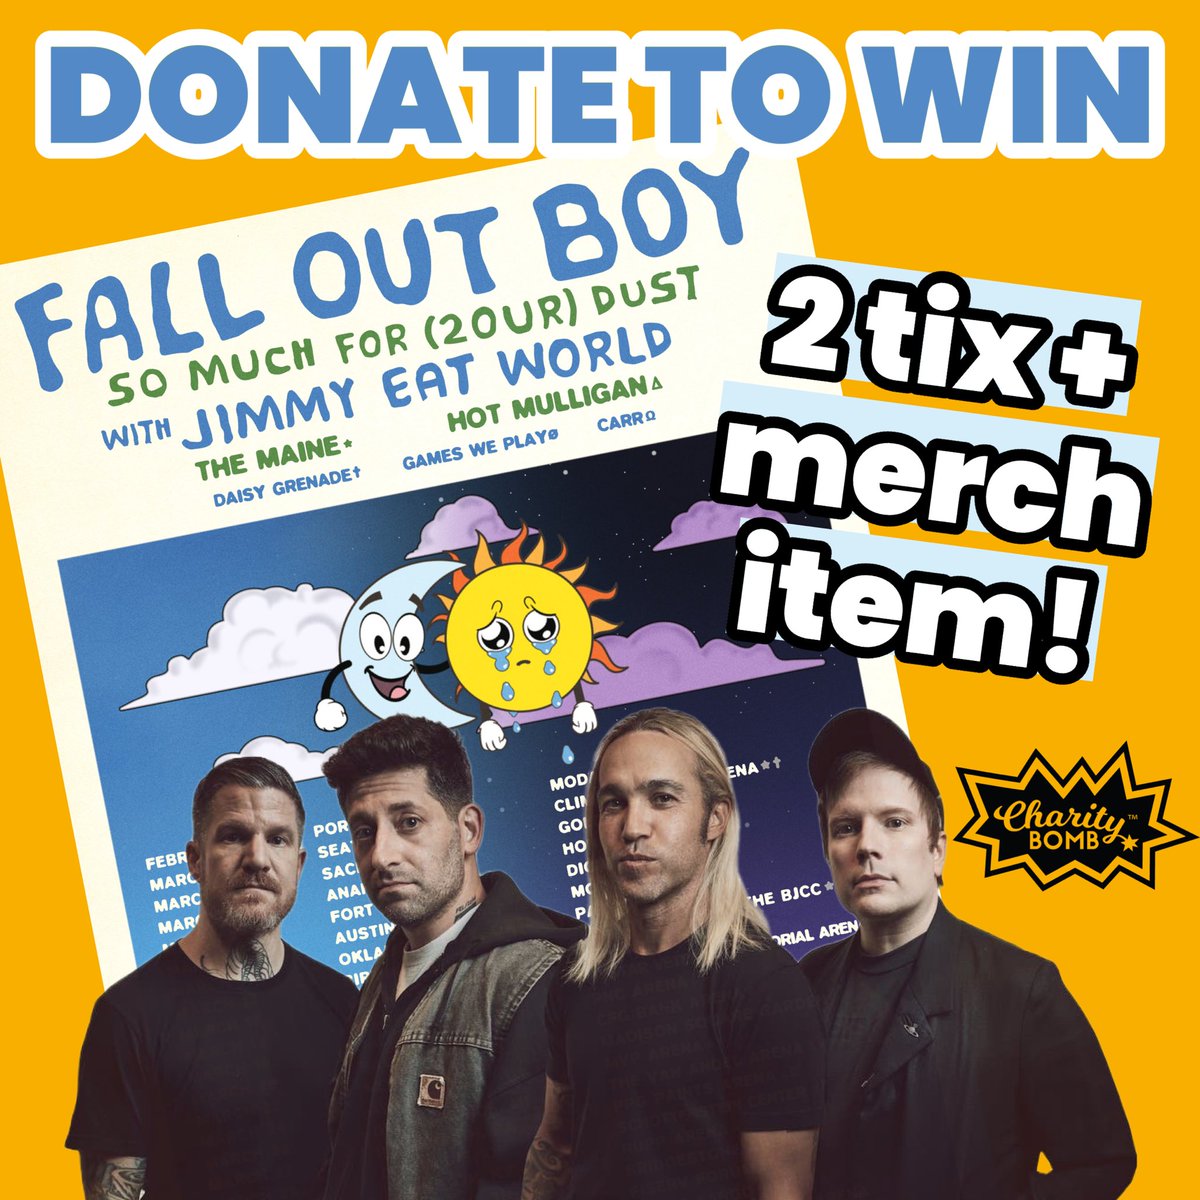 ❤️‍🔥 @falloutboy is supporting our mission to create mentally strong communities by donating 2 Tix + a merch item to be raffled off to one lucky fan… and their friend 😉

ENTER HERE: bit.ly/WinFOBTickets

#charitybomb #falloutboy #raisestrongchildren #emotionalintelligence